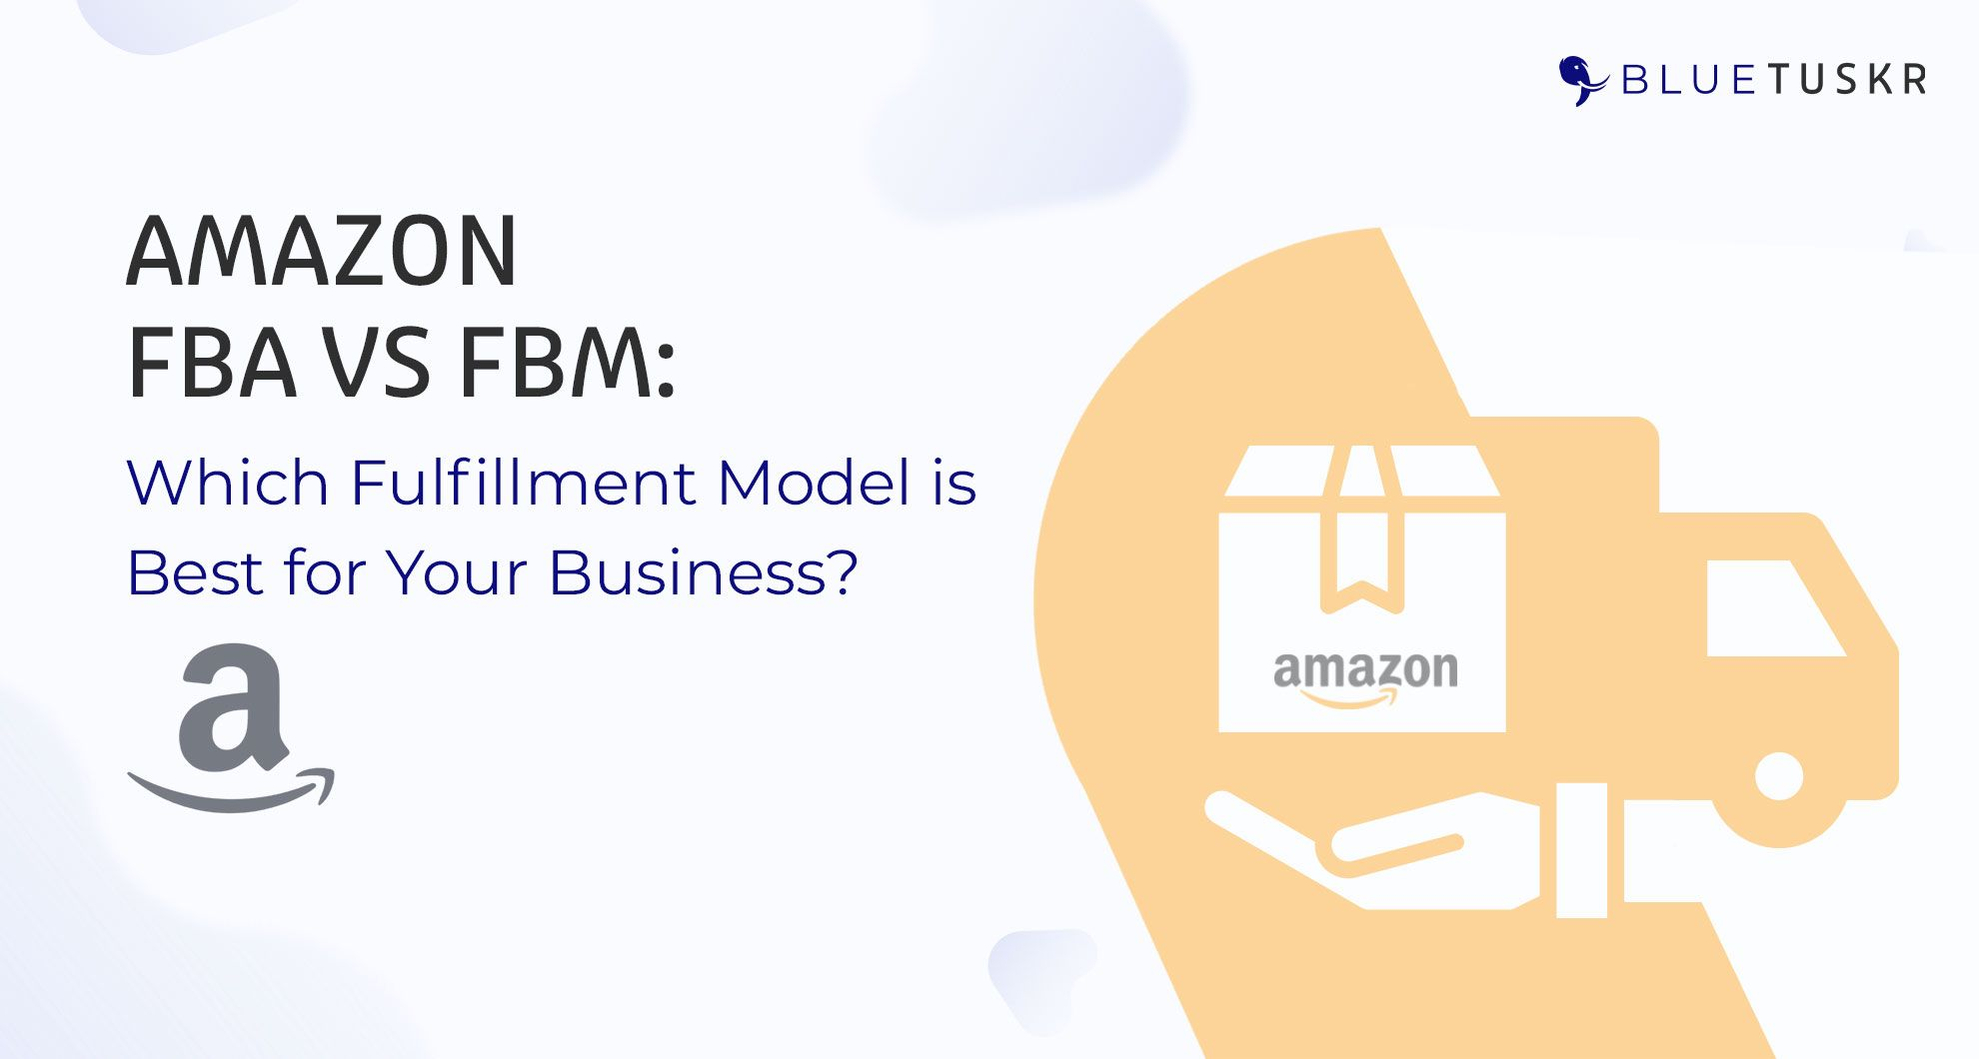 Amazon FBA vs FBM: Which Fulfillment Model is Best for Your Business?